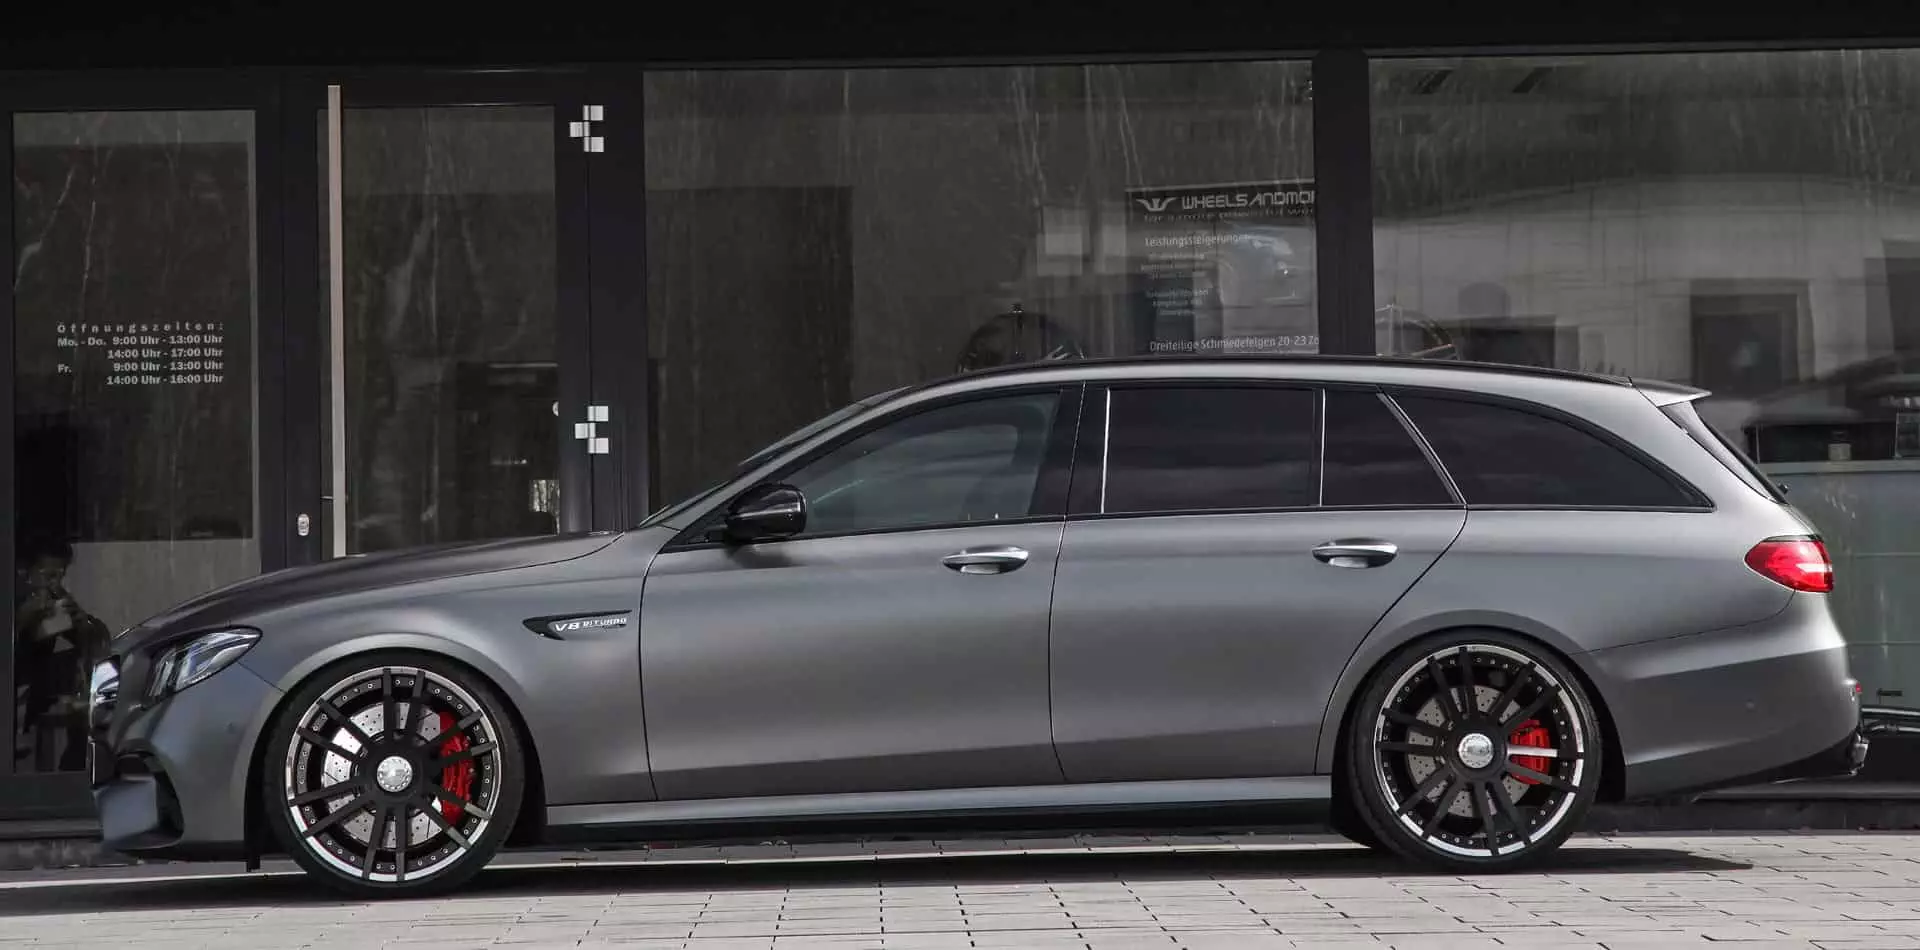 Mercedes E63 AMG W213 tuning, wheels and exhaust